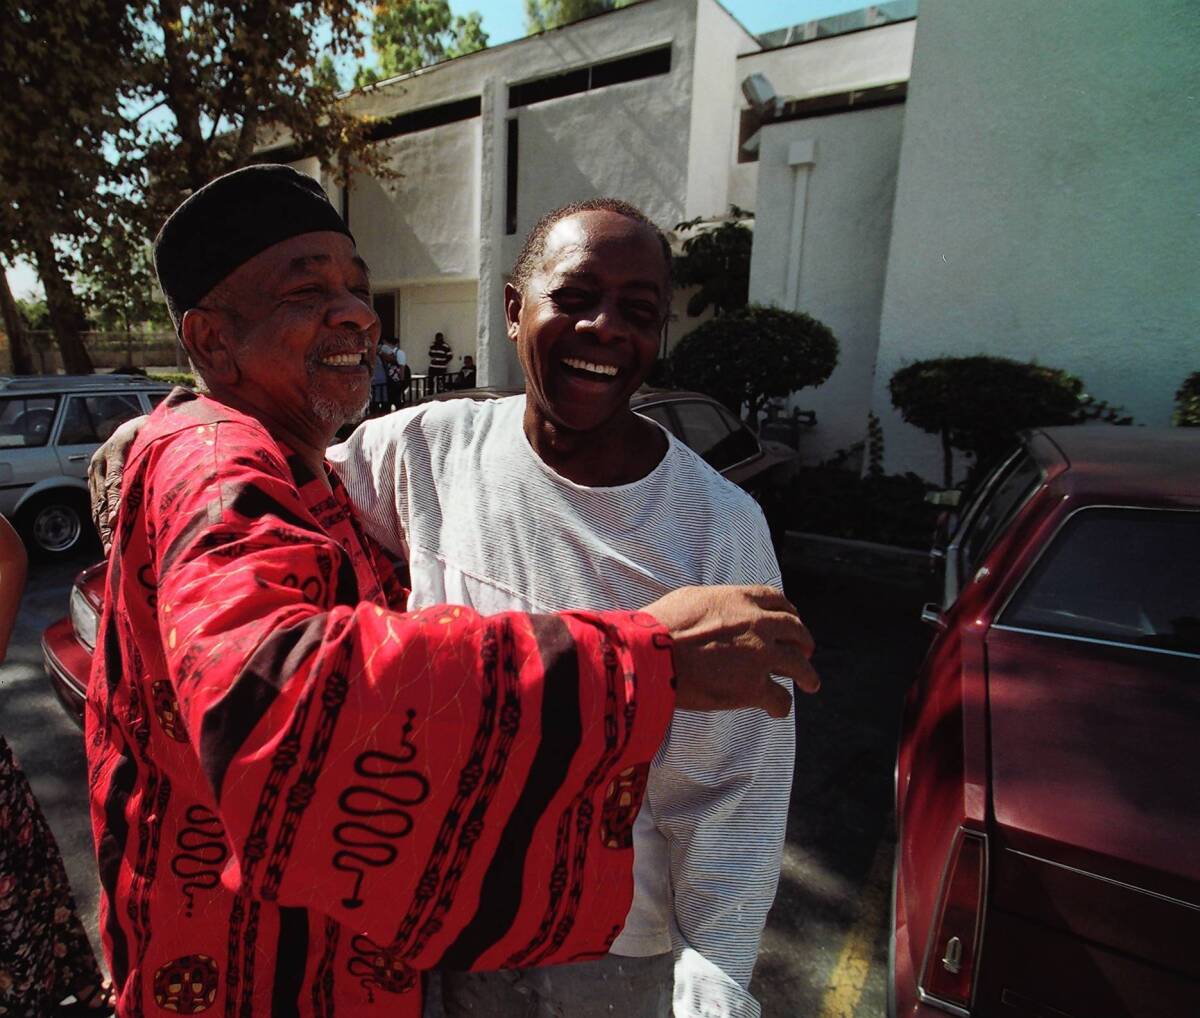 Cecil Fergerson, left, hugs artist Elliott Pinkney outside the Watts Mafundi Institute in 1997, when Pinkney repainted a mural at the site that he'd originally painted years before.